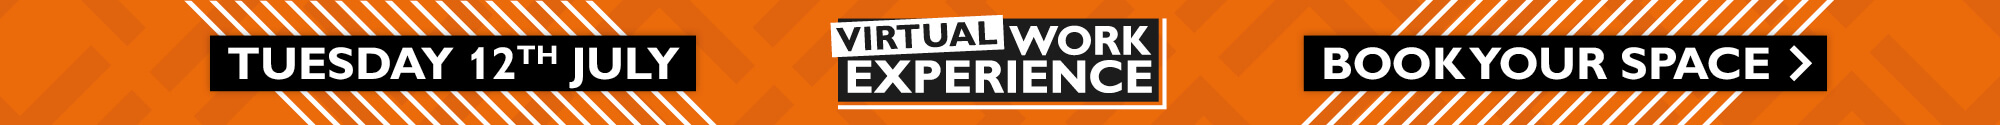 Virtual Work Experience wording on orange background with Book Your Space call to action